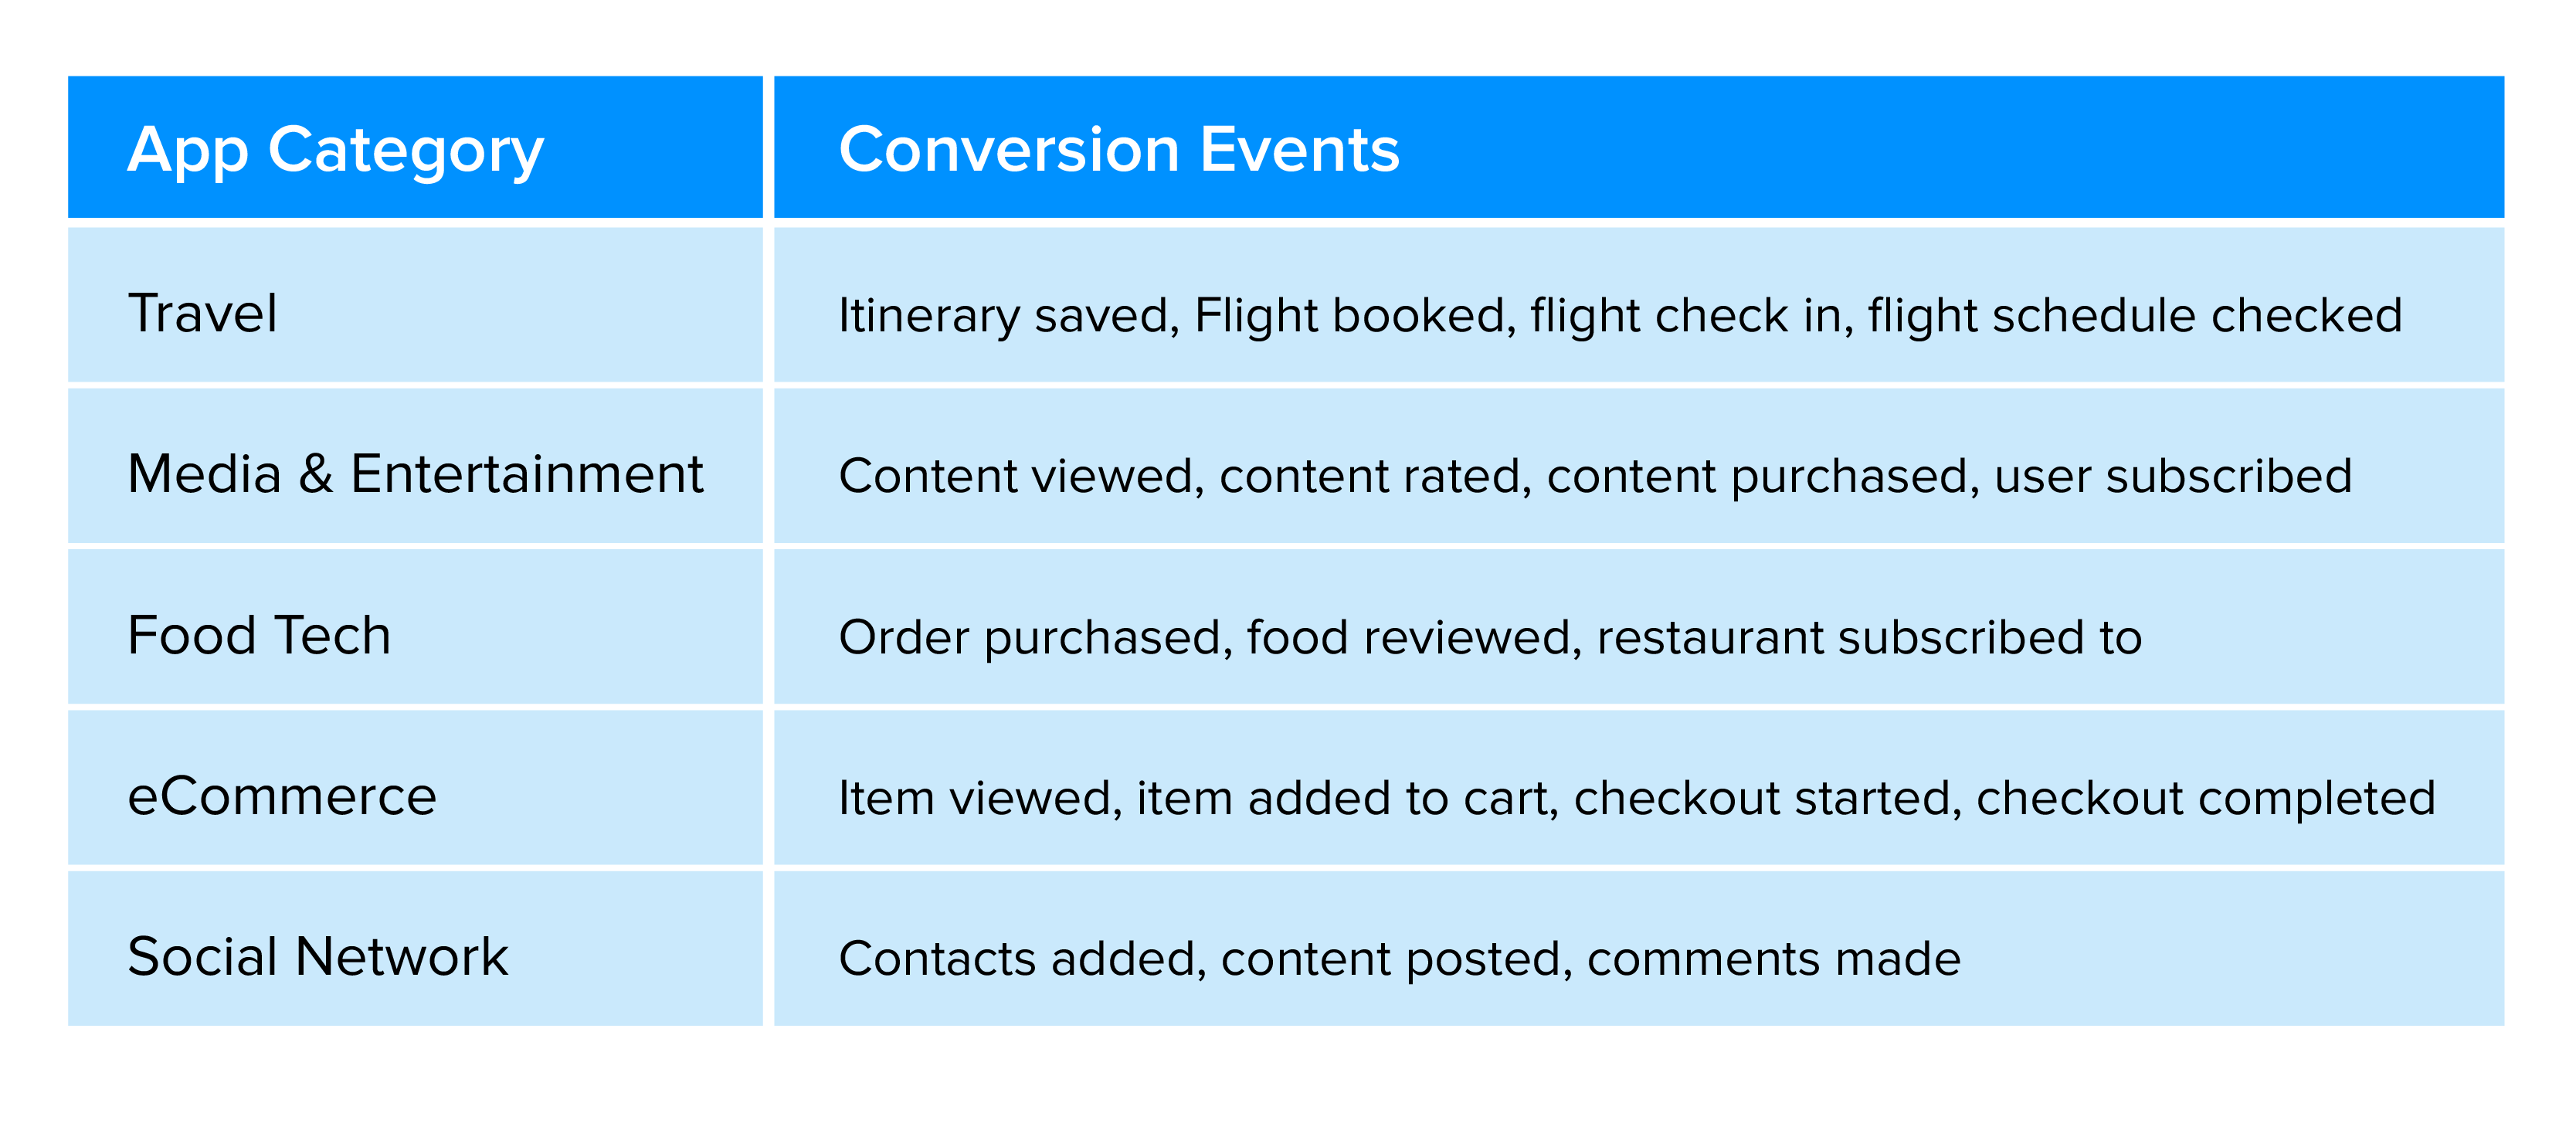 Actions for various app categories that act as conversion points